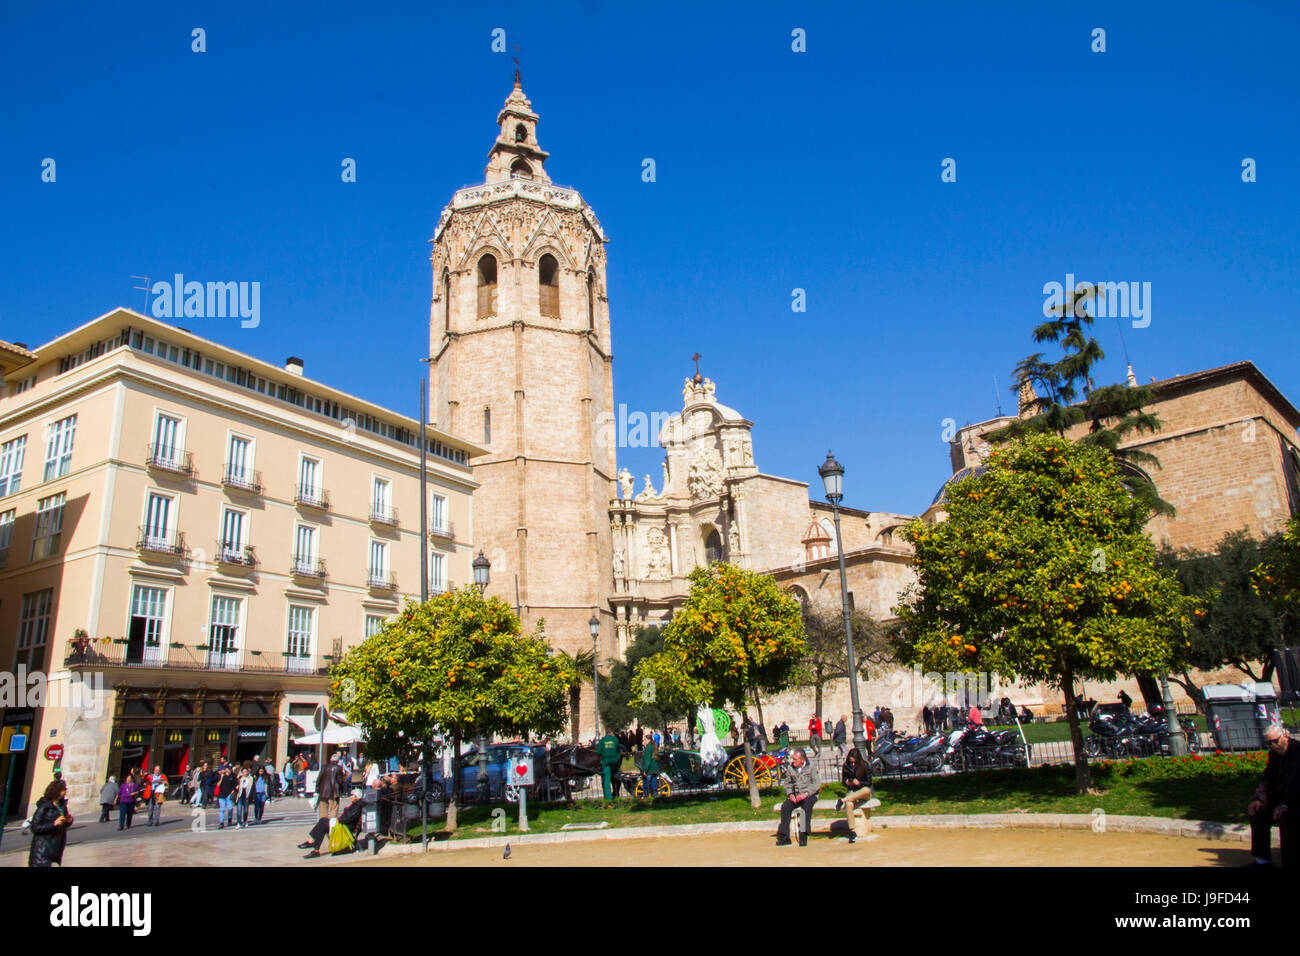 Viewed from Plaza de la Reina, the Gothic-style Bell tower or Micalet, fronts the Valencia Cathedral, Valencia, Spain. Stock Photo